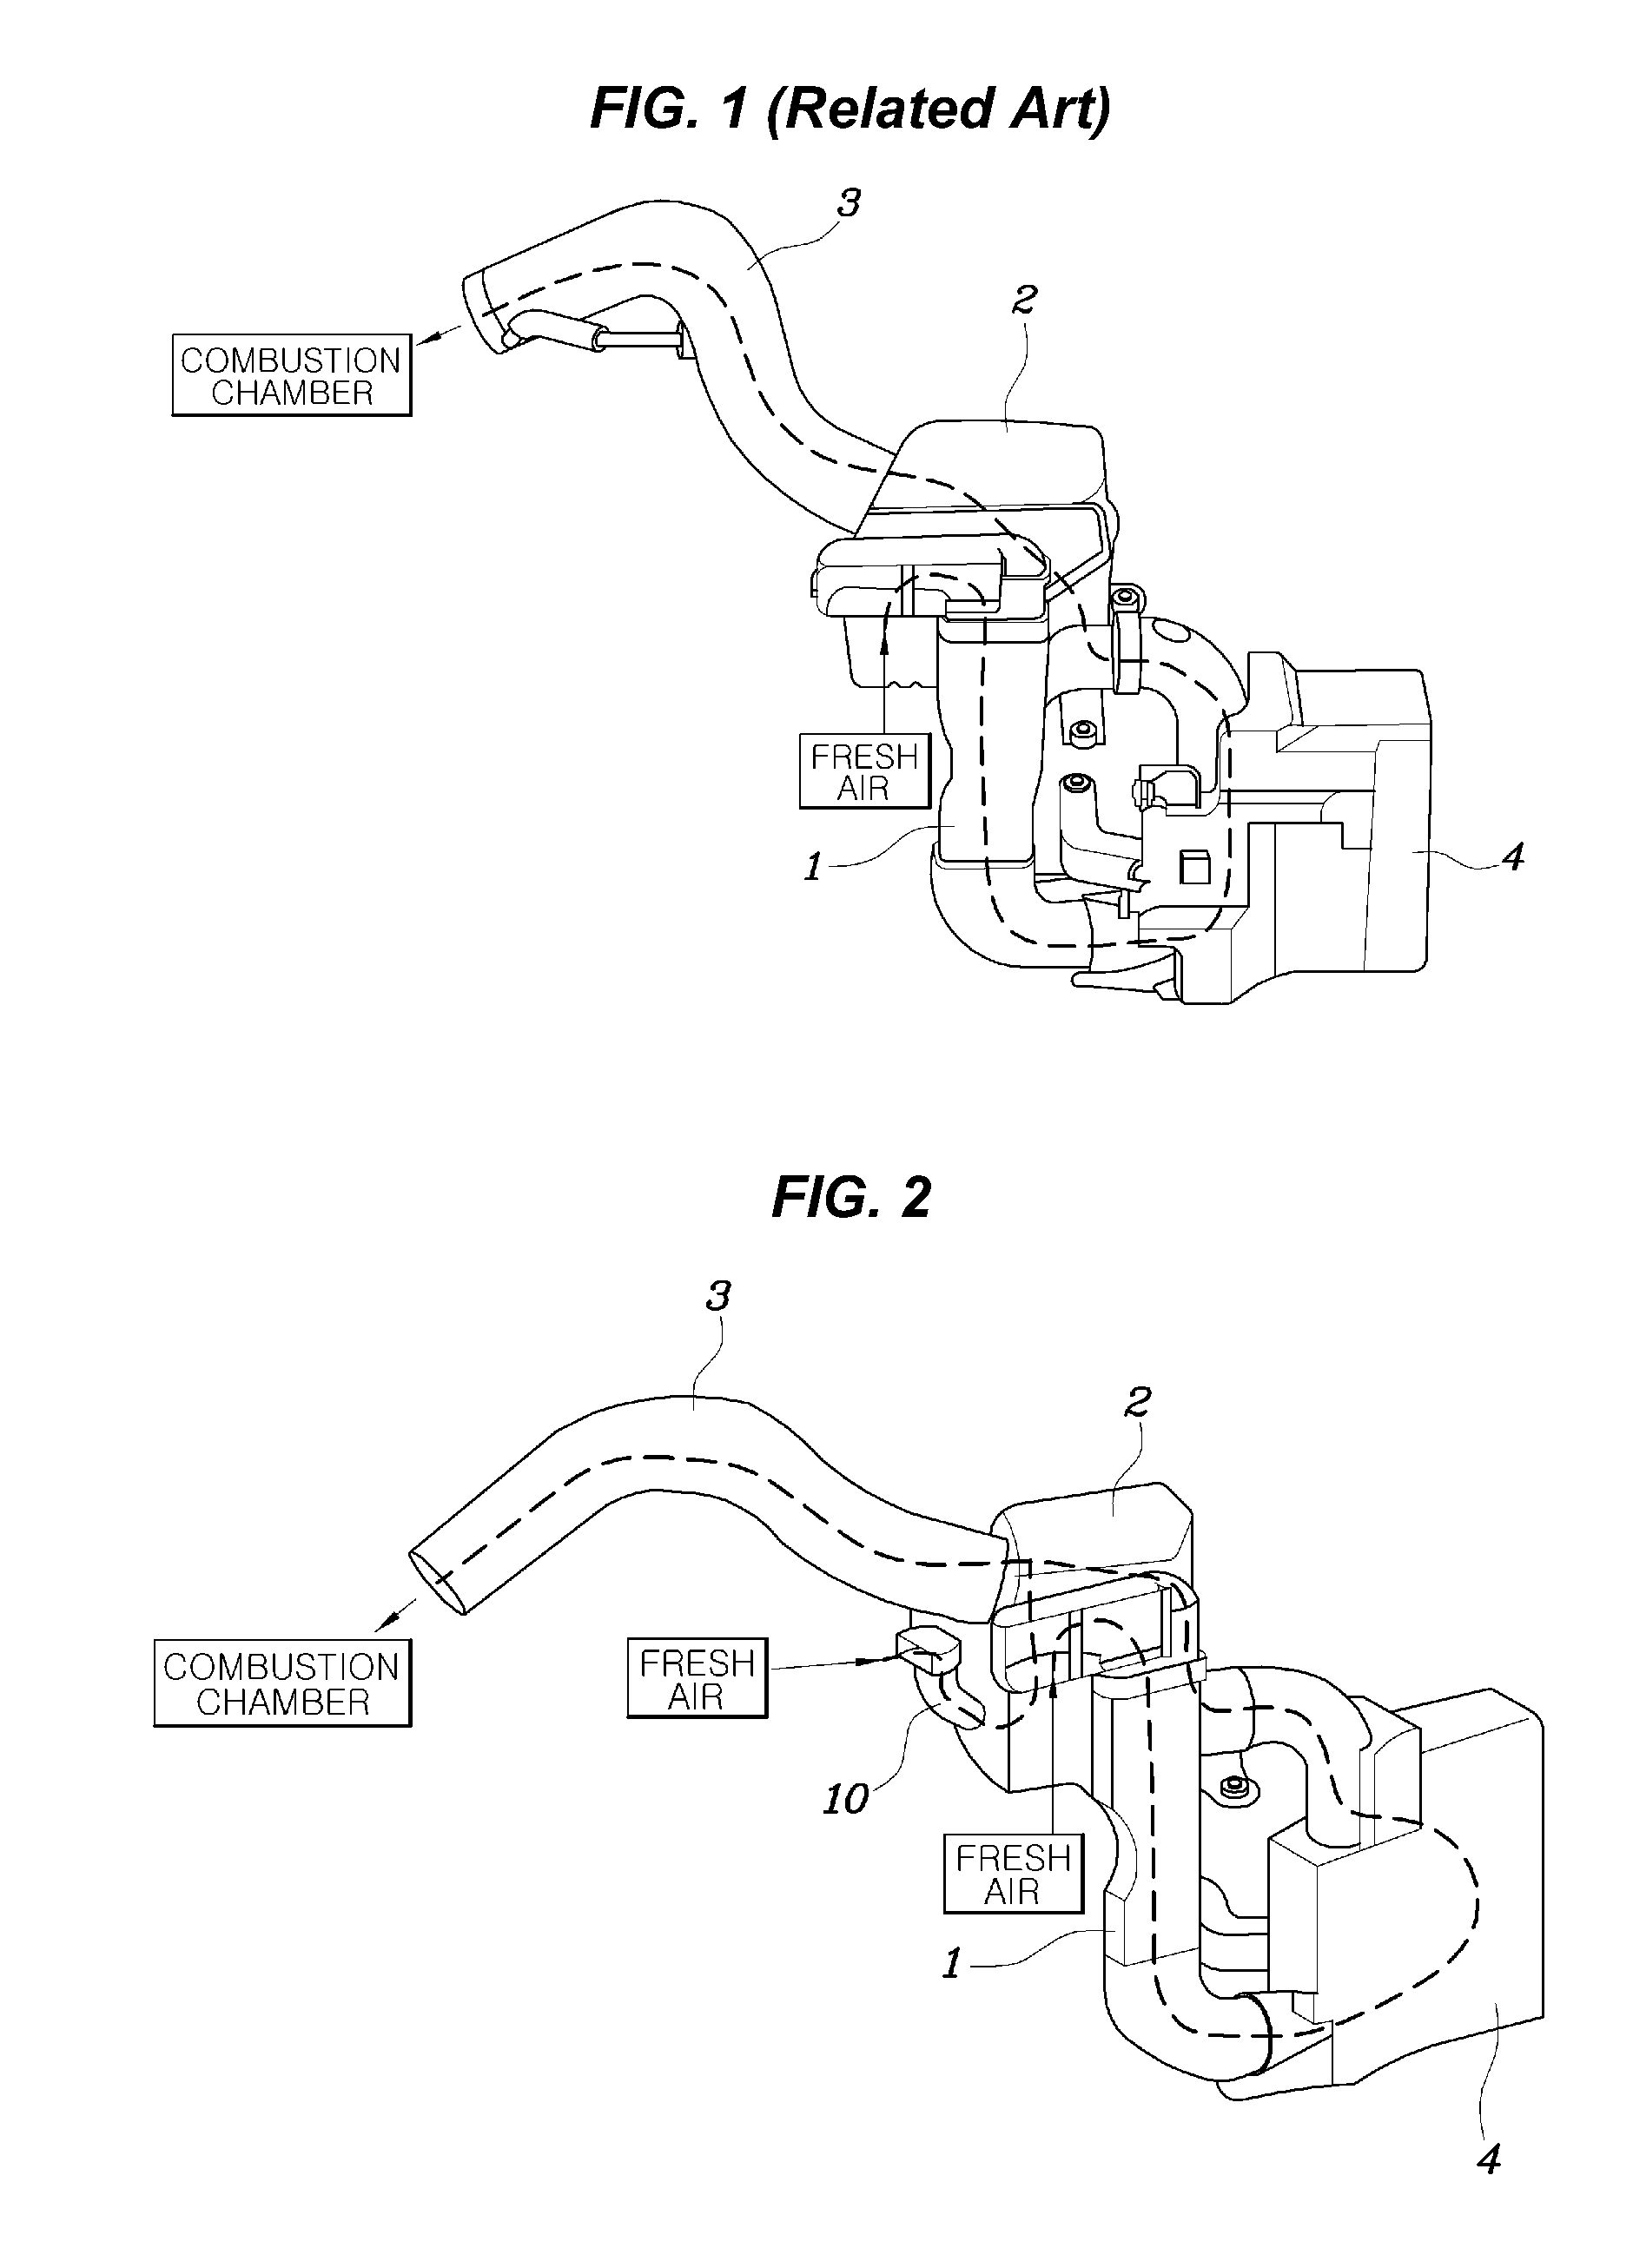 Variable intake device of engine